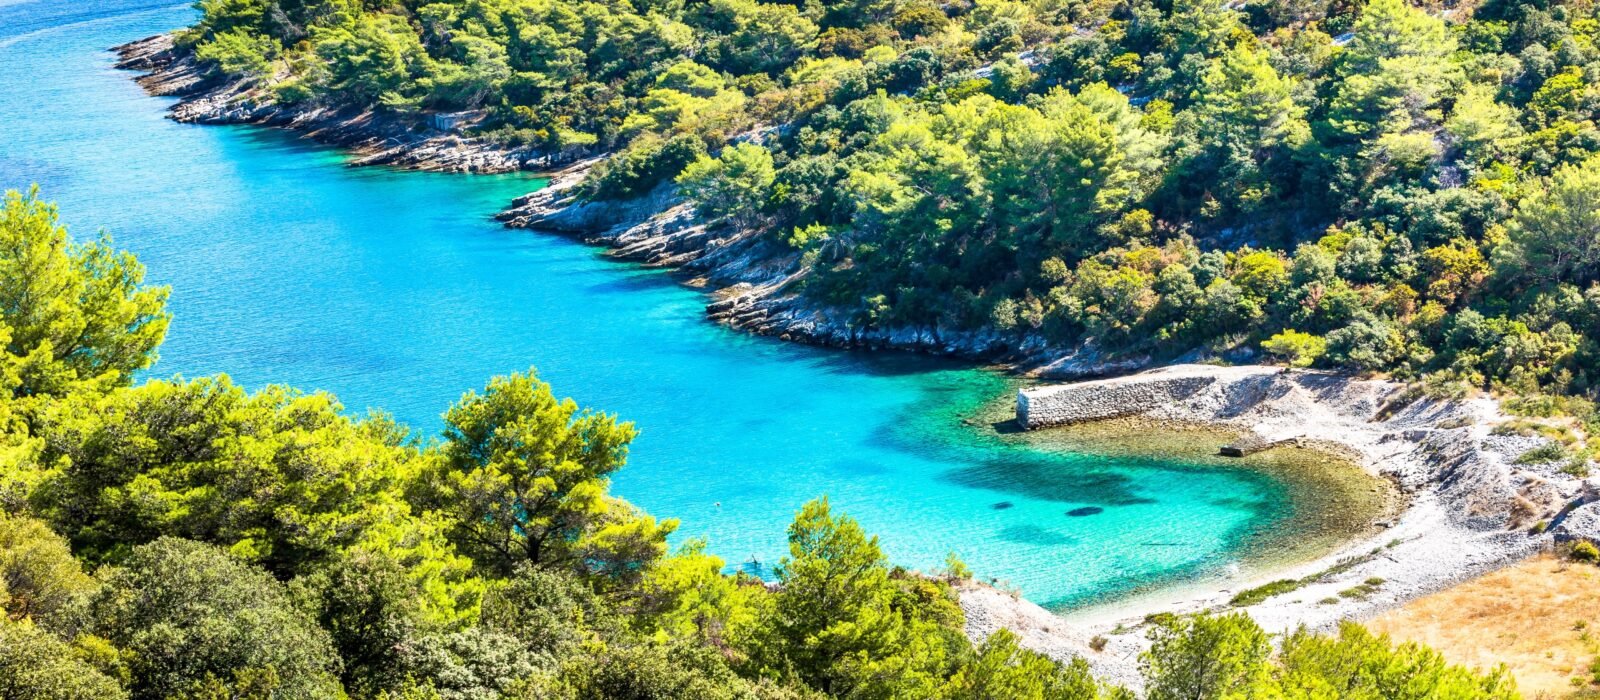 Crystal blue waters of the Island of Brac, Croatia, with forest lined rugged coastline